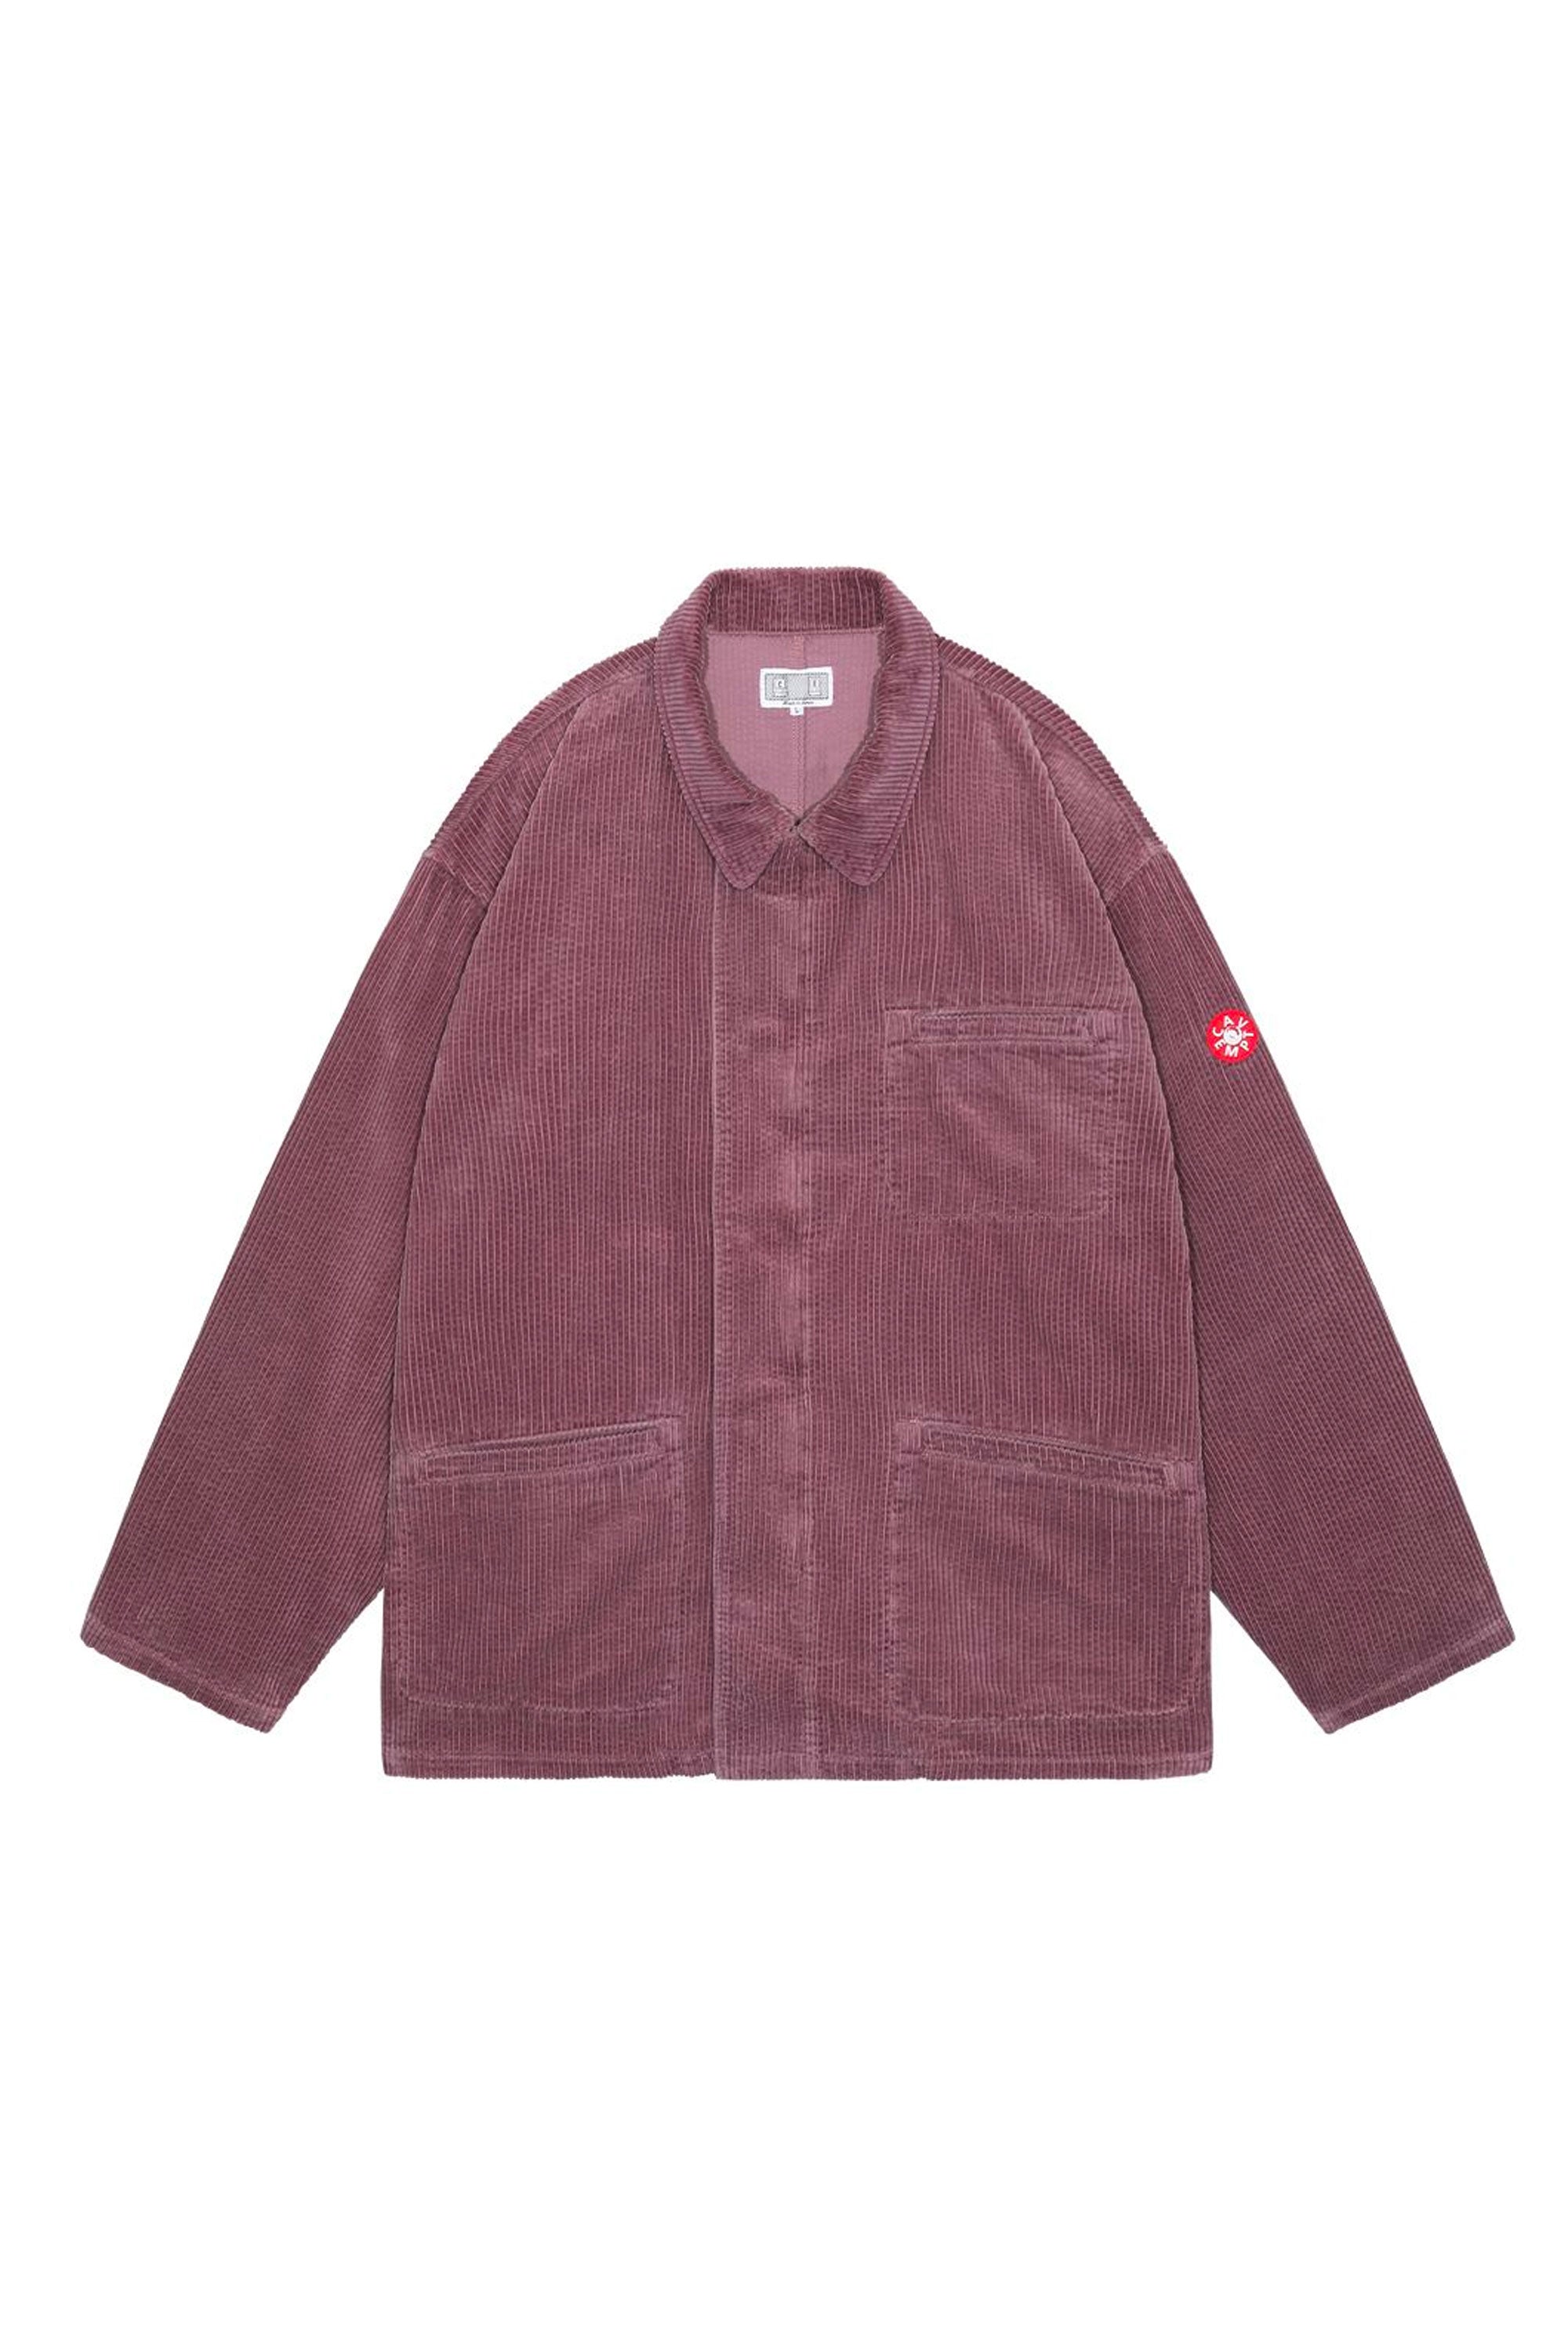 The CAV EMPT - 6W CORD JACKET  available online with global shipping, and in PAM Stores Melbourne and Sydney.